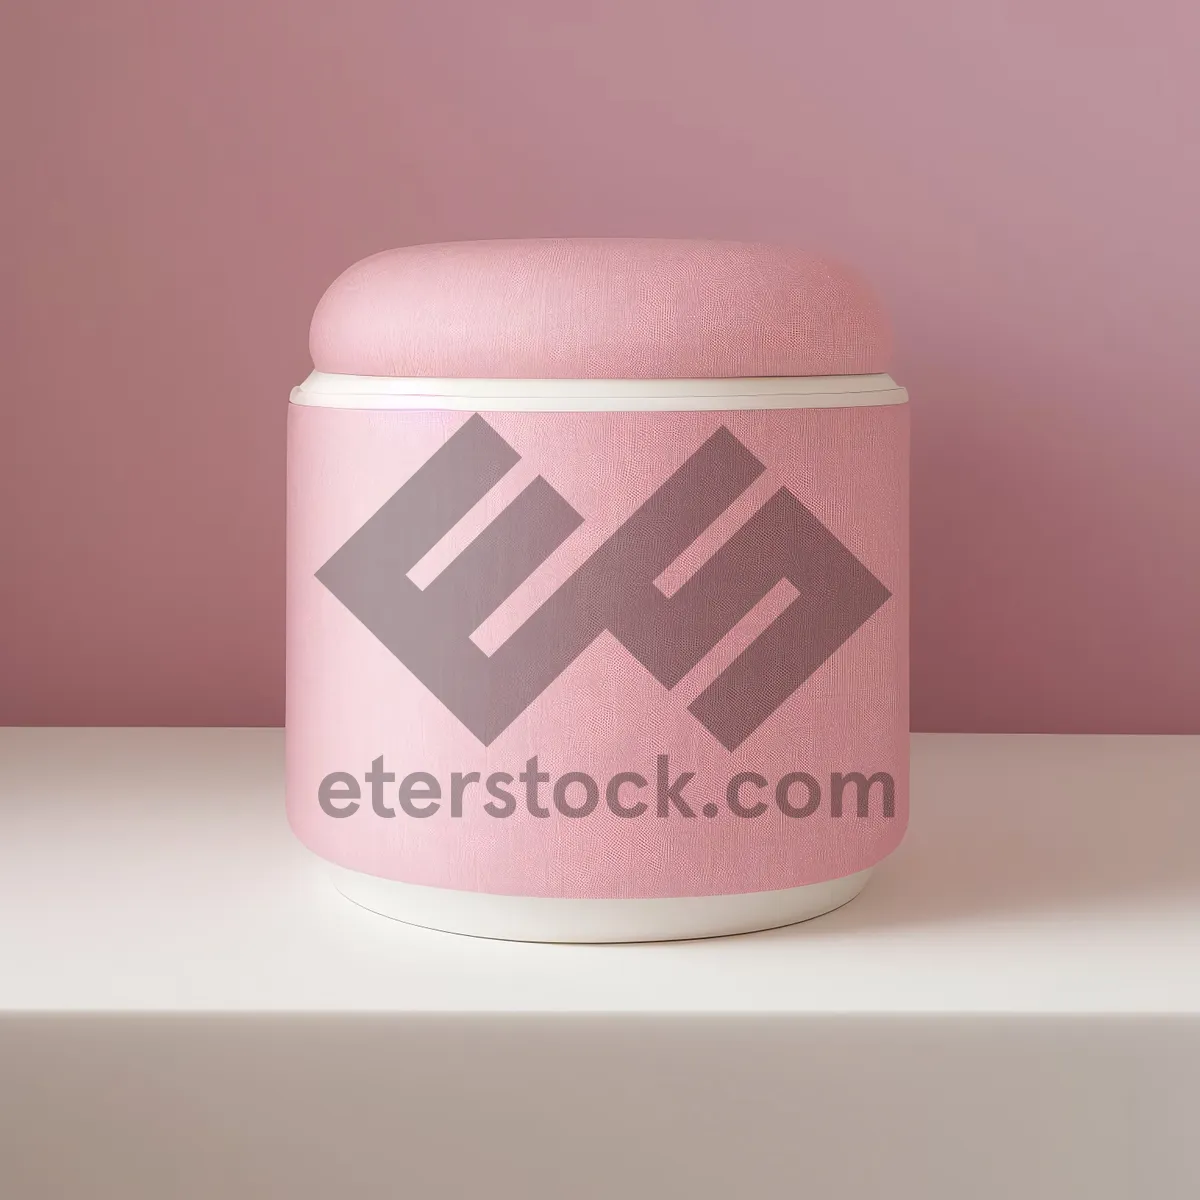 Picture of Luxurious Face Powder in Chic Cosmetic Container